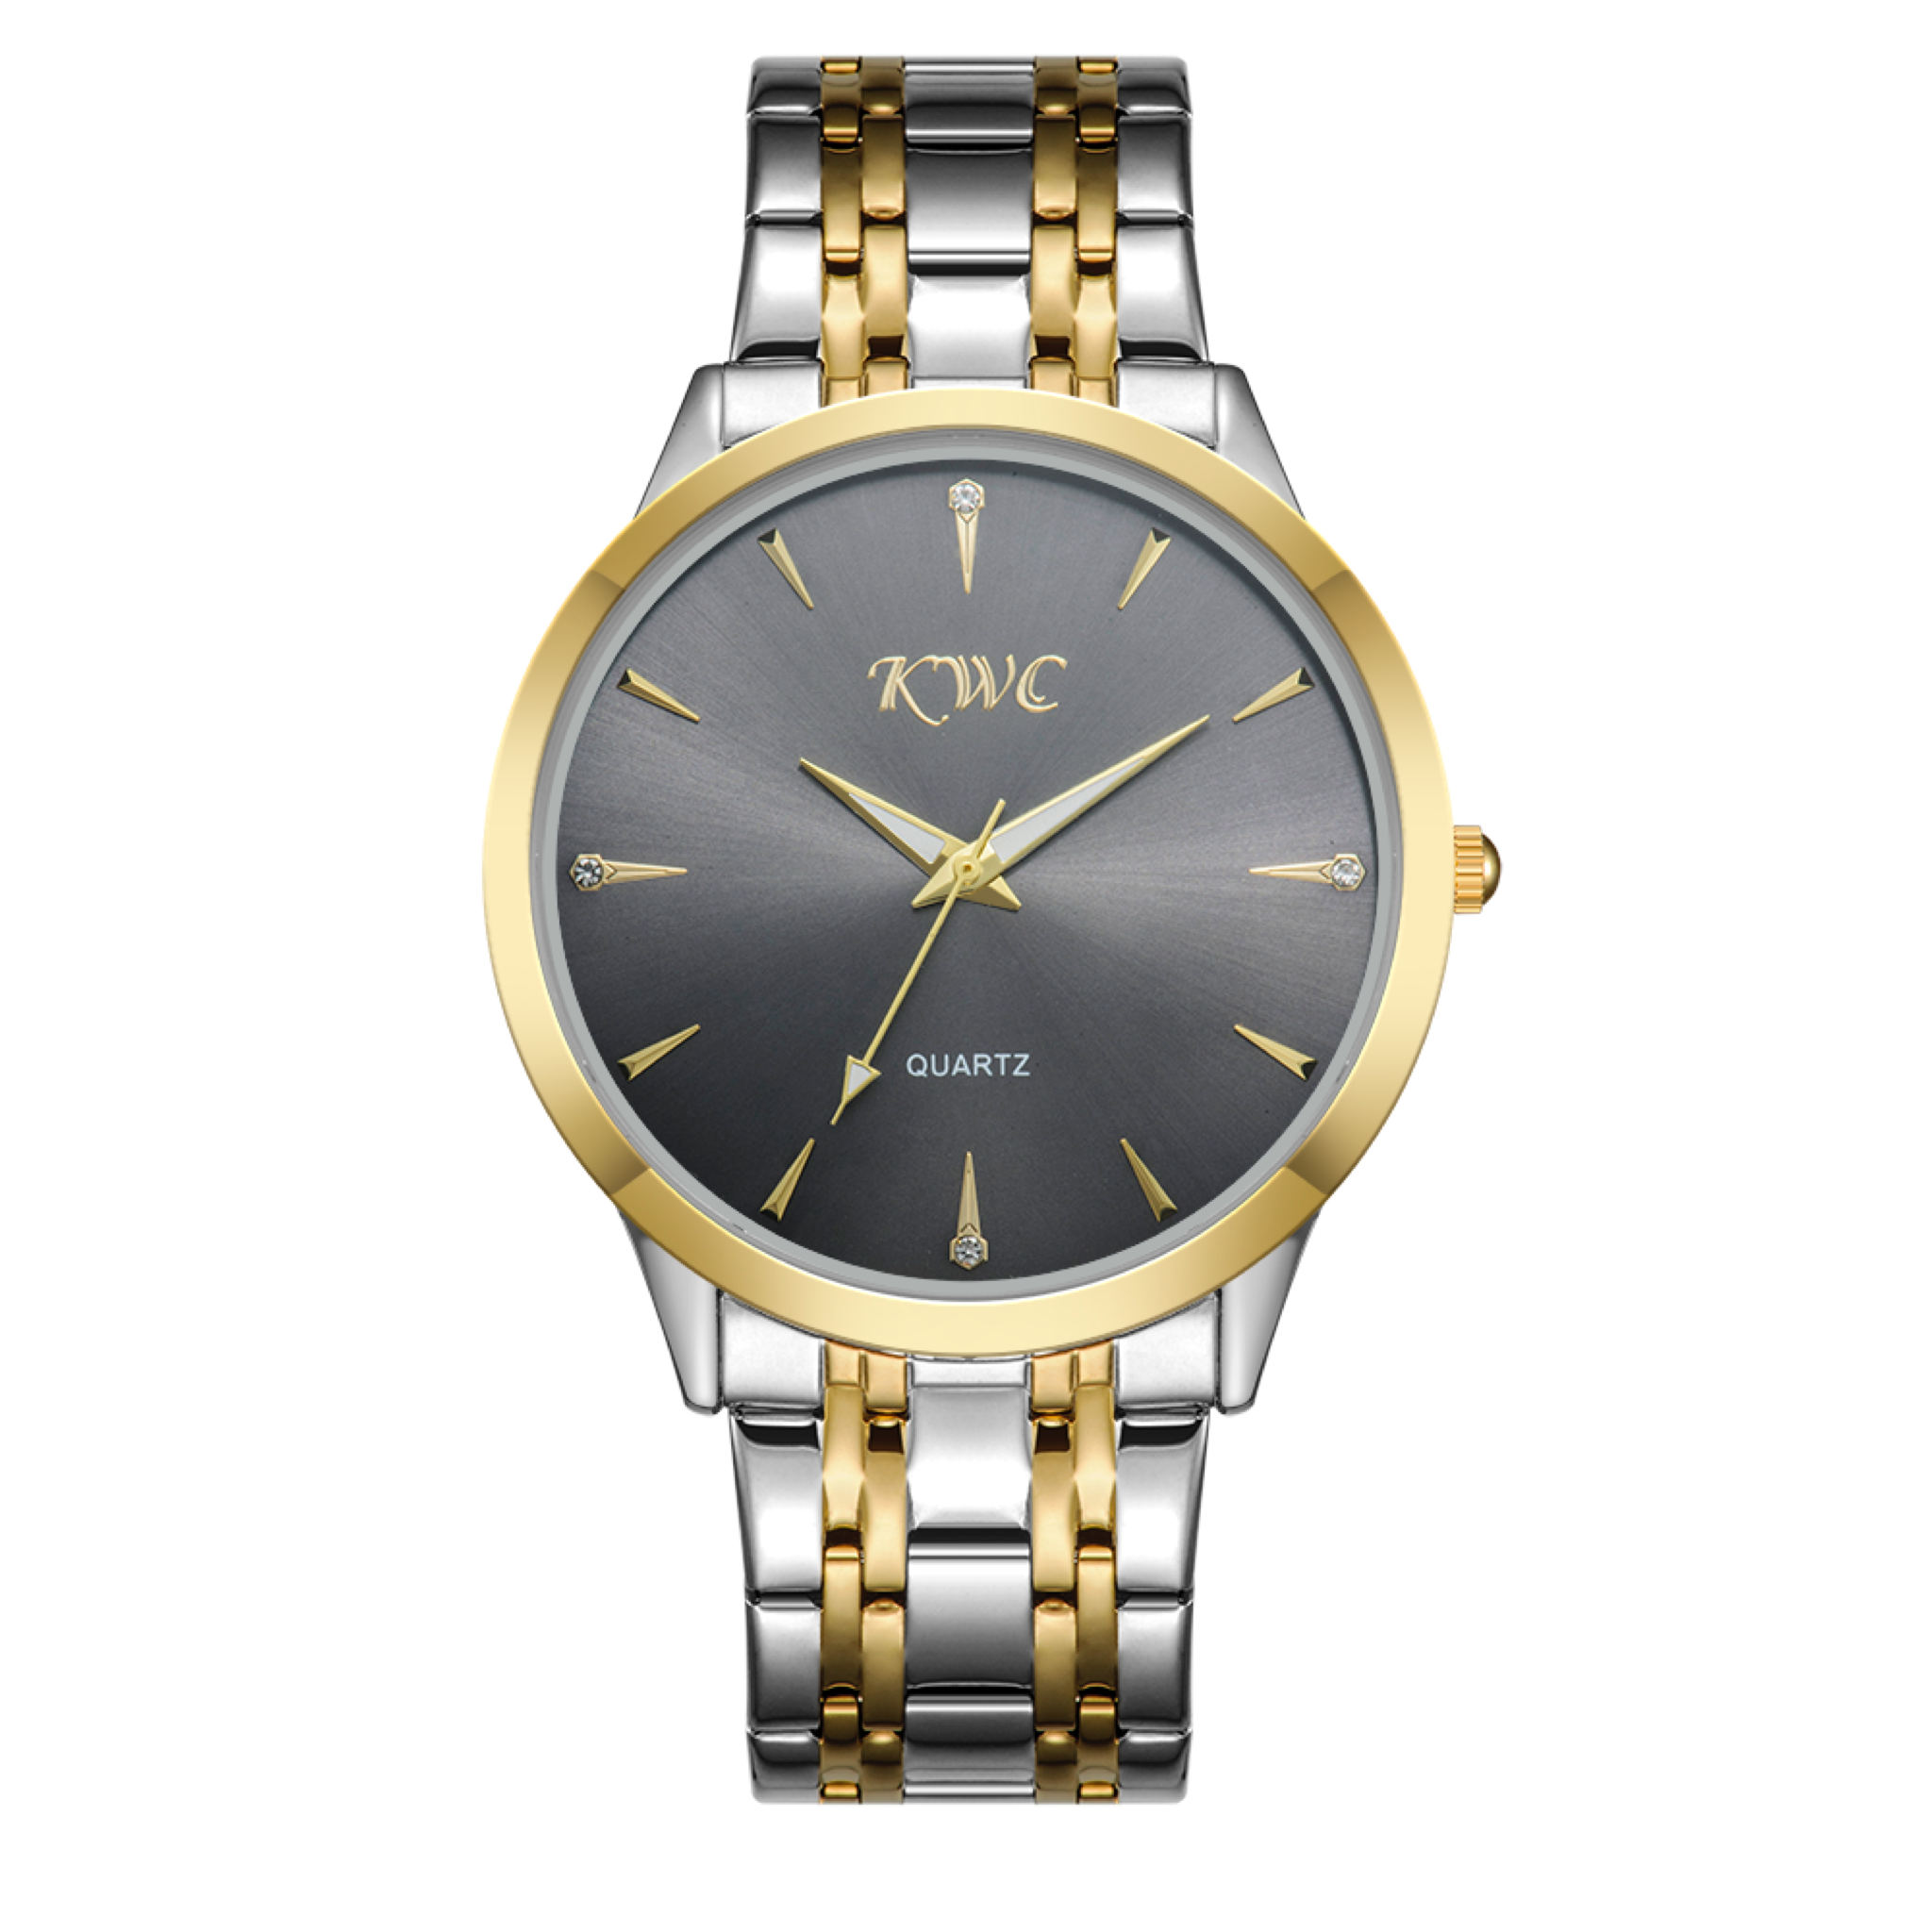 Kwc Watches For Men / Original Watches In Pakistan / Men's Watches Review / Kwc  Watches Price / - YouTube